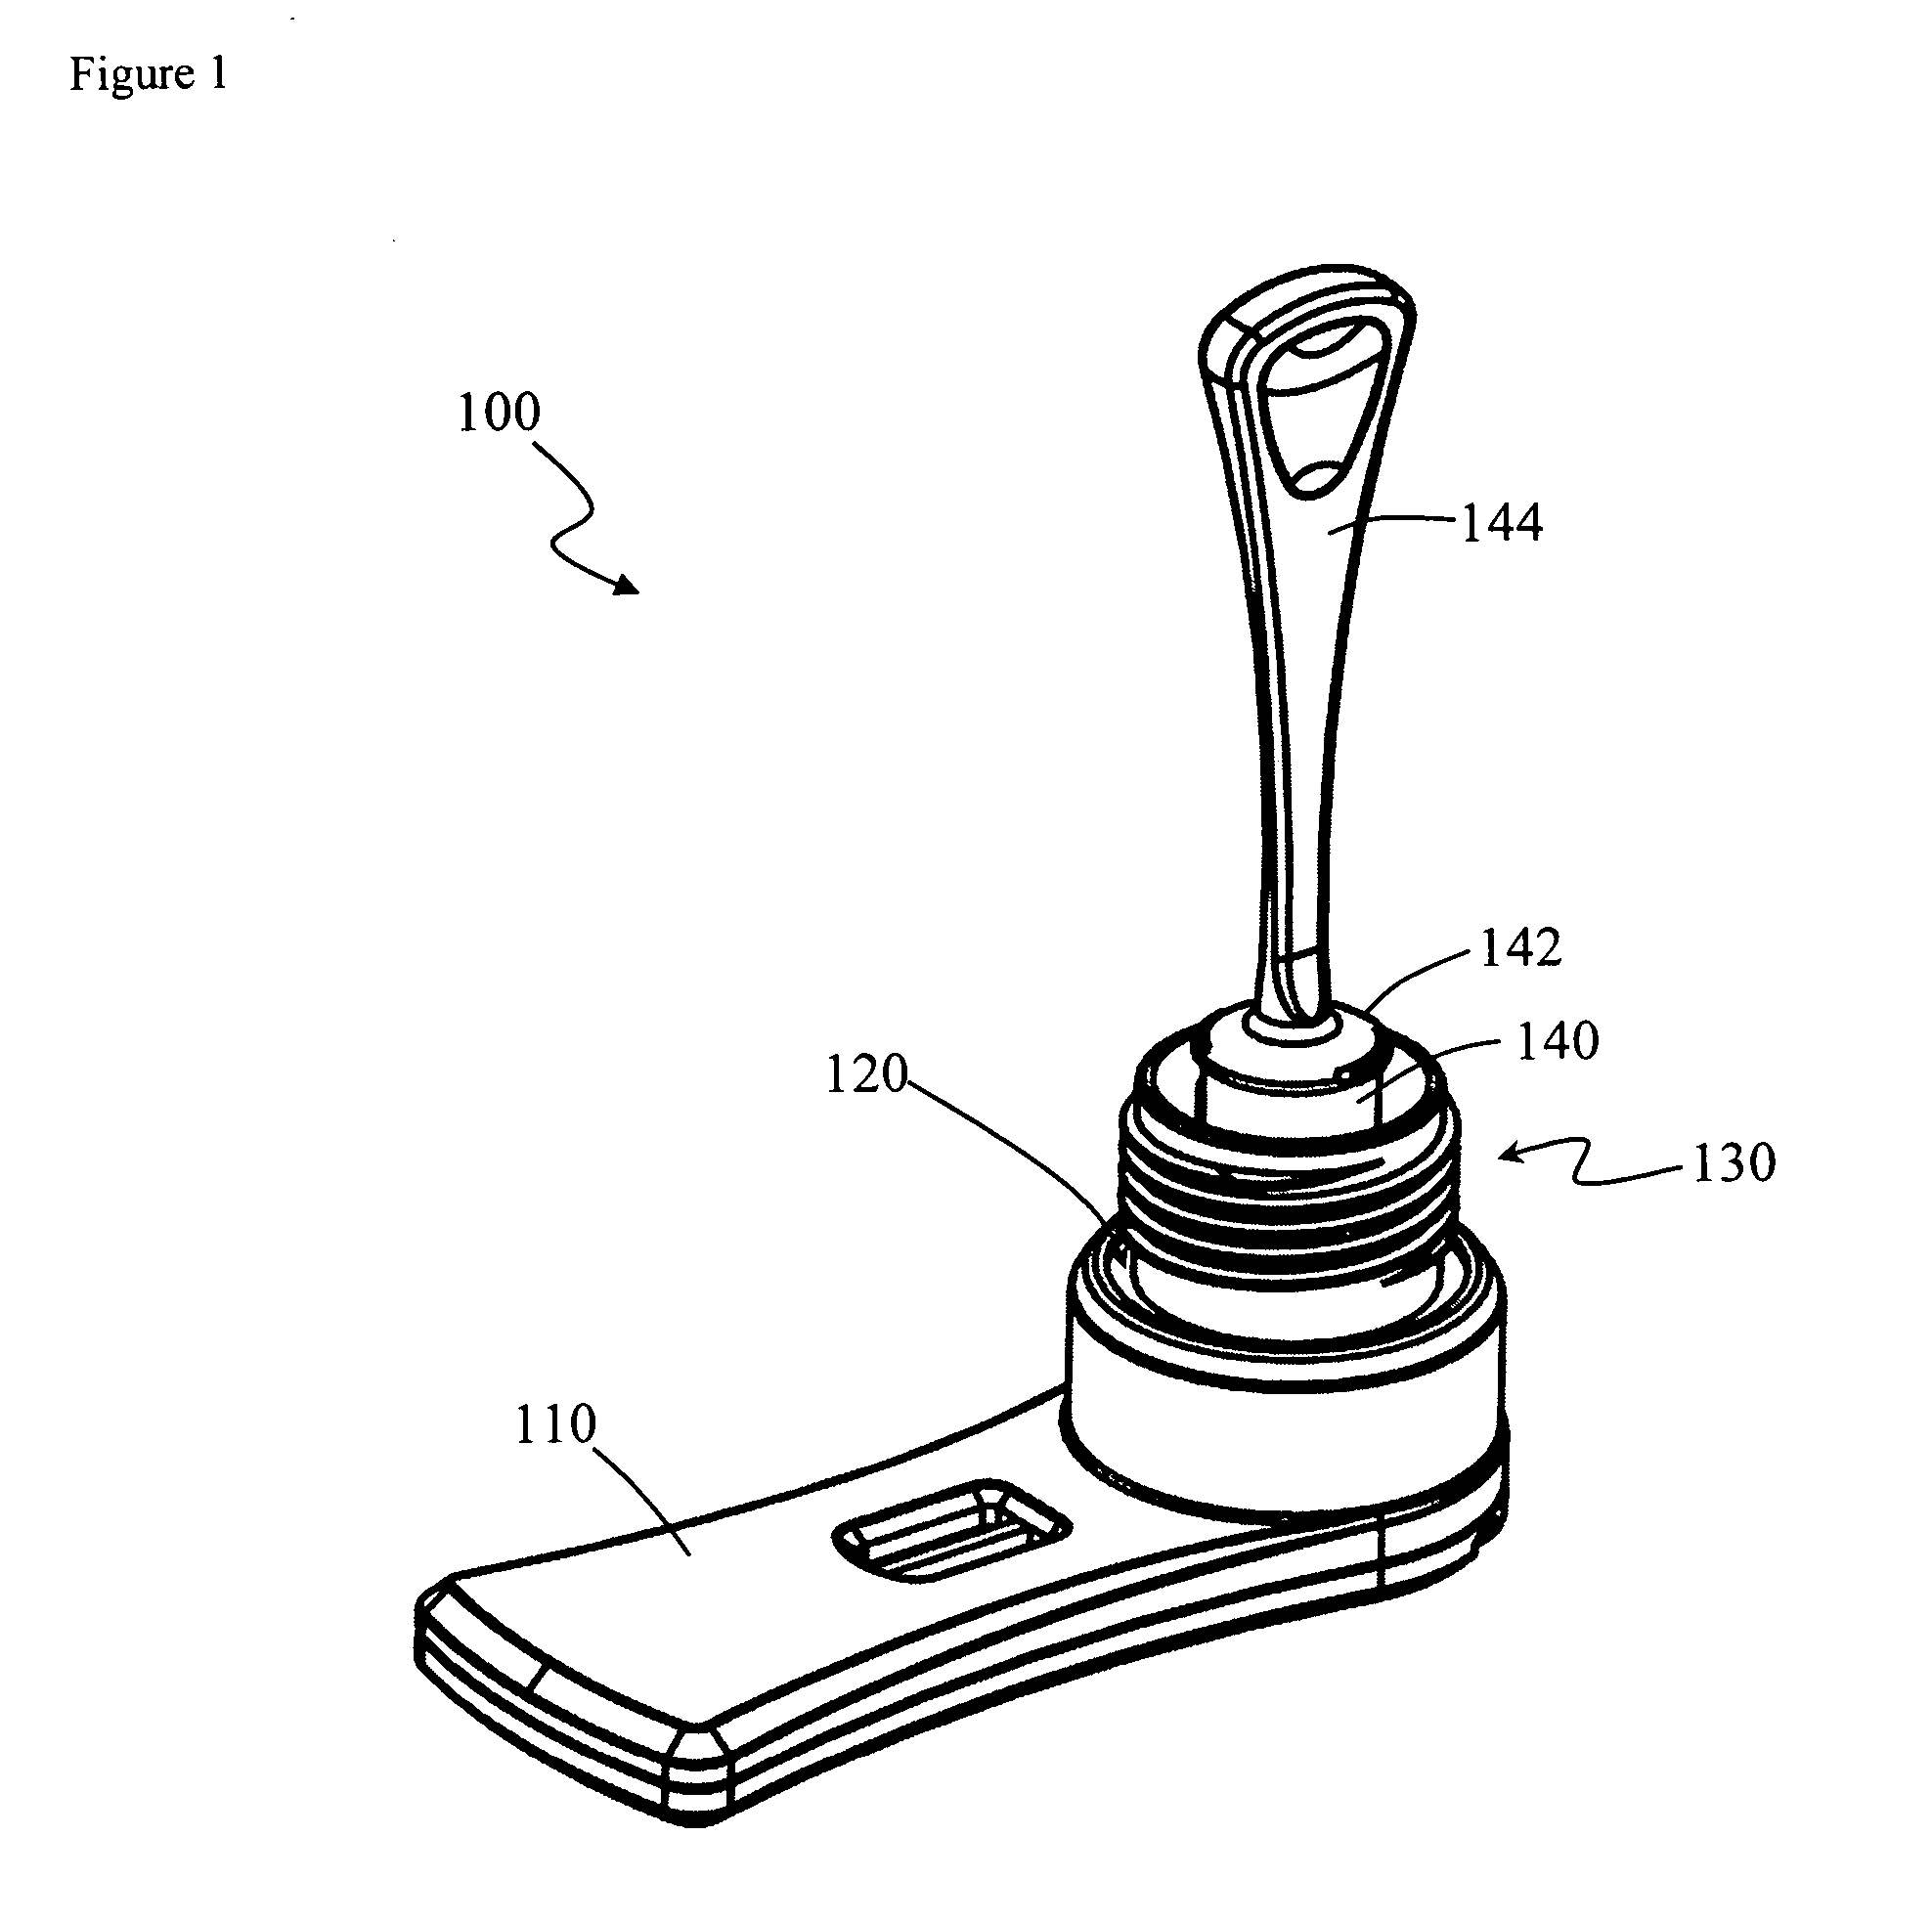 Rapid sample collection and analysis device and methods of use